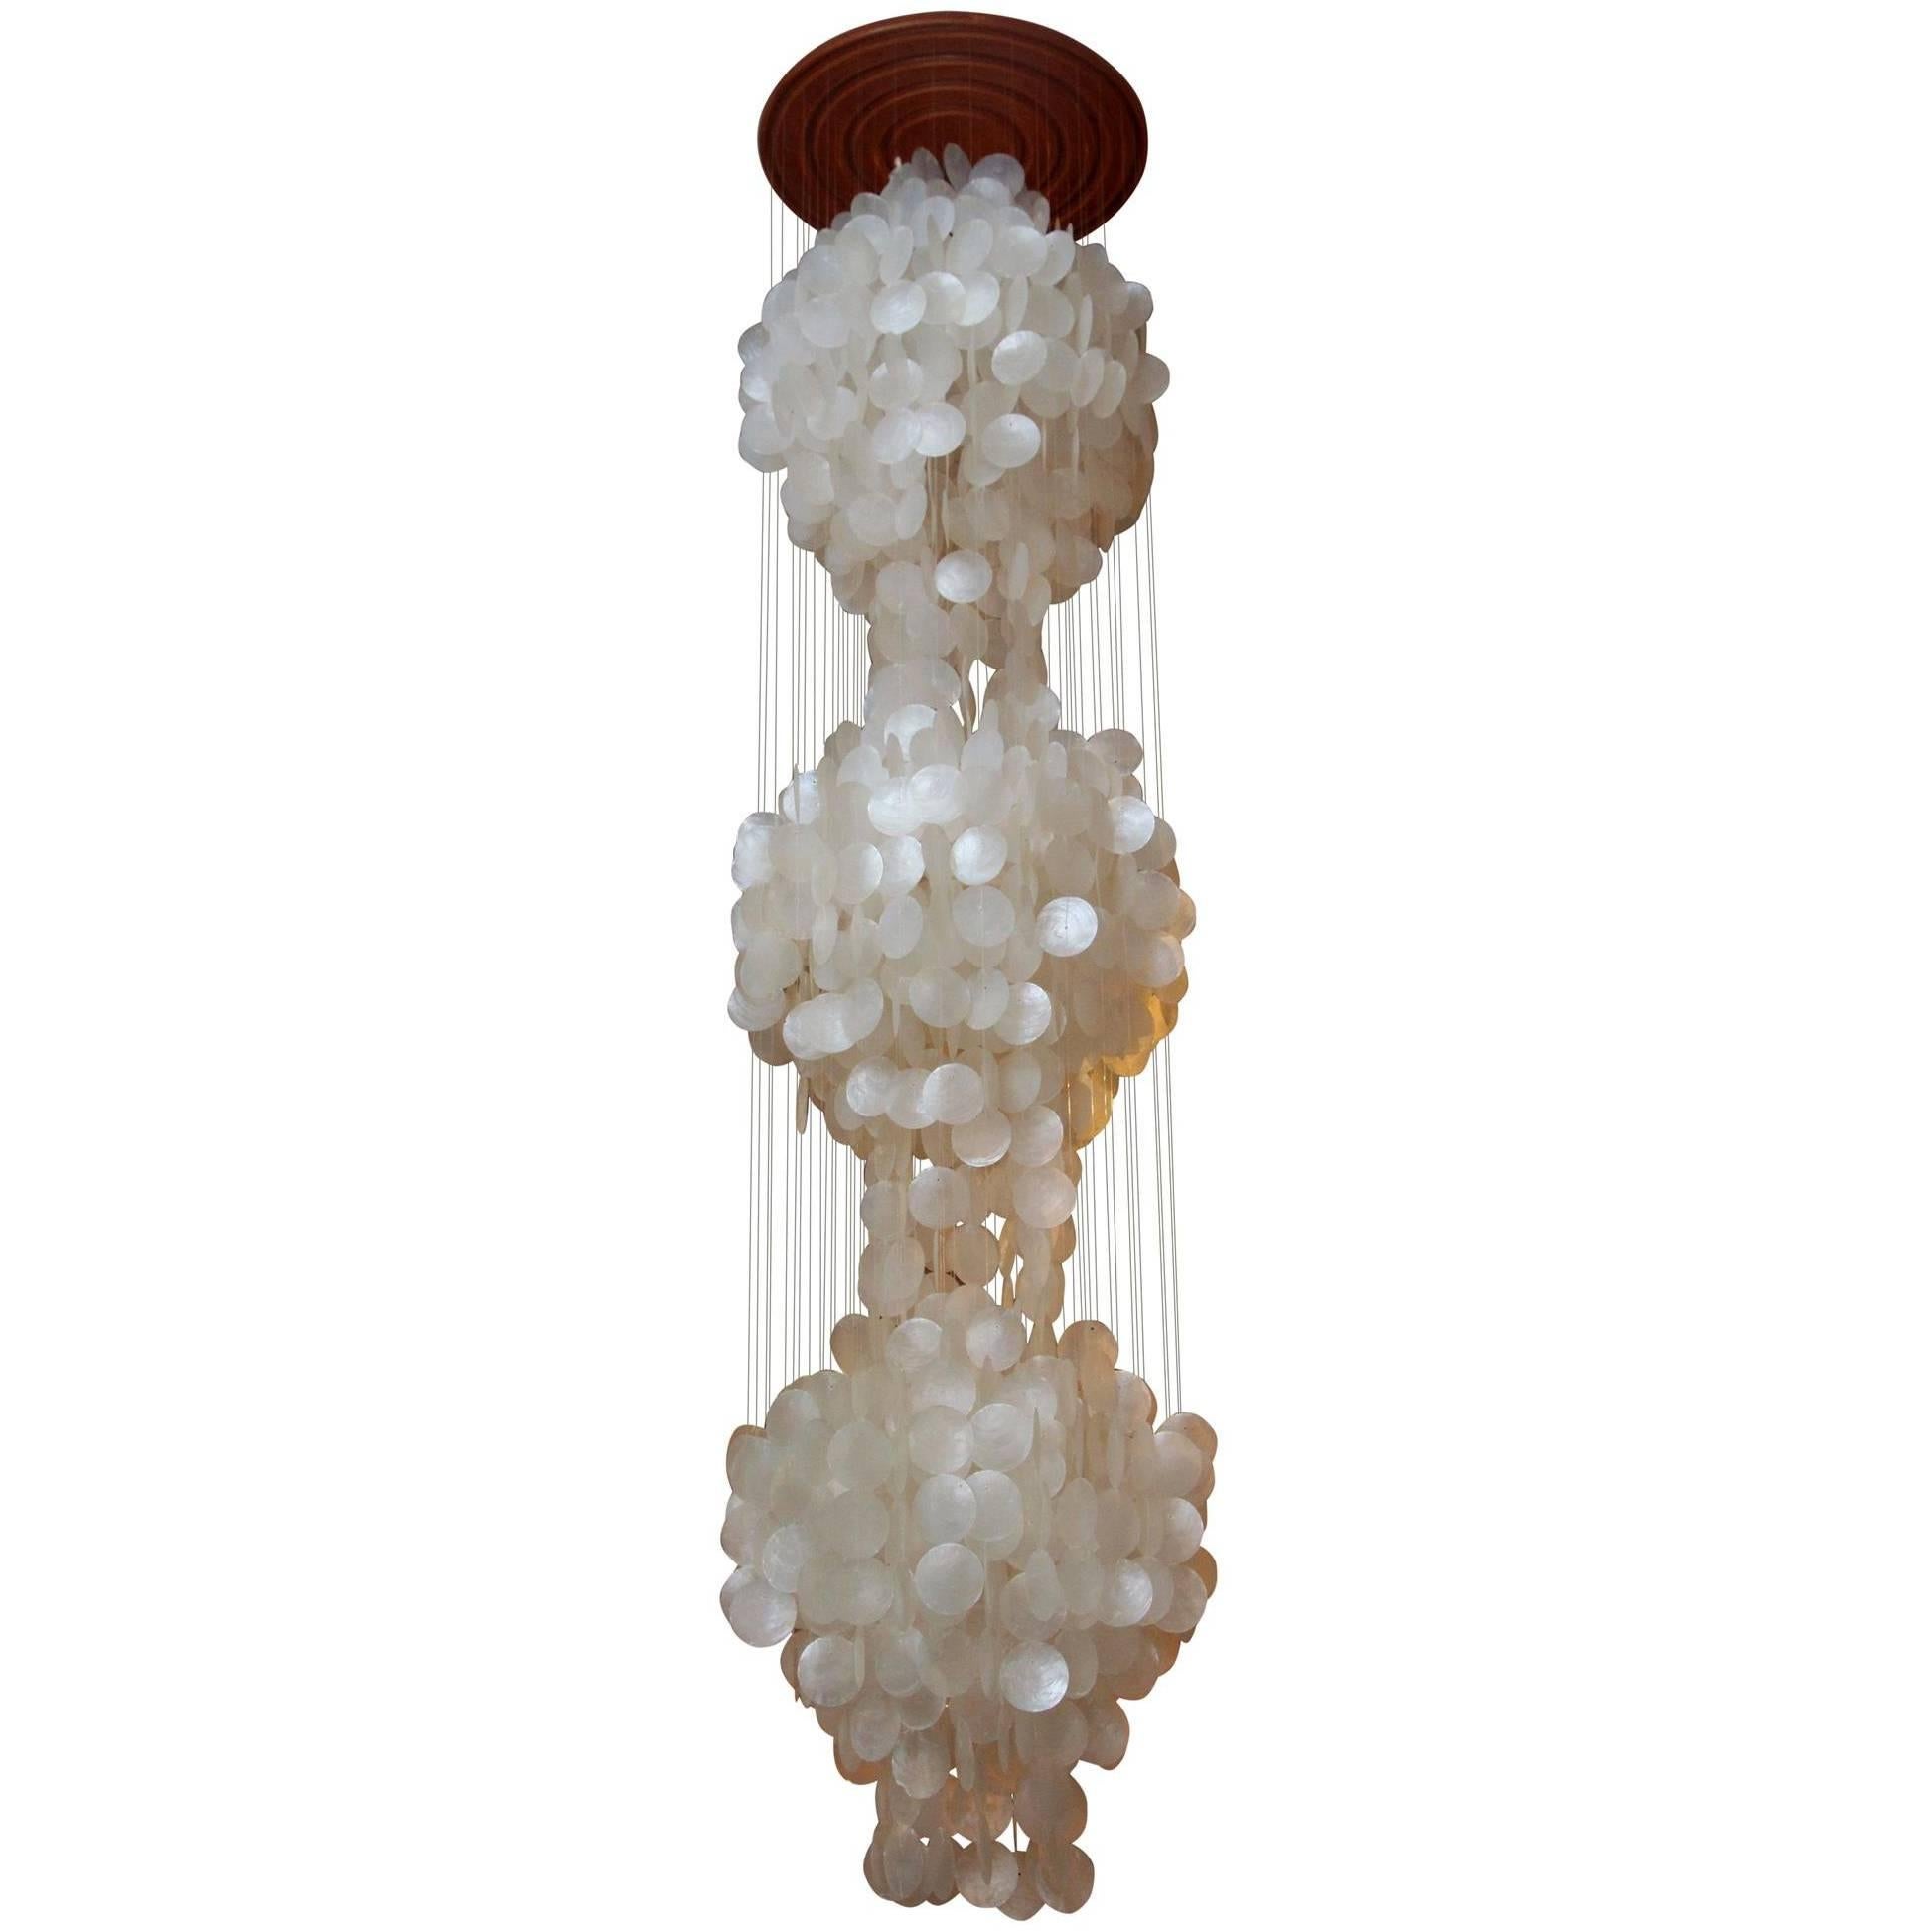 1990s Midcentury Chime with Genuine White Capiz Shell and Light